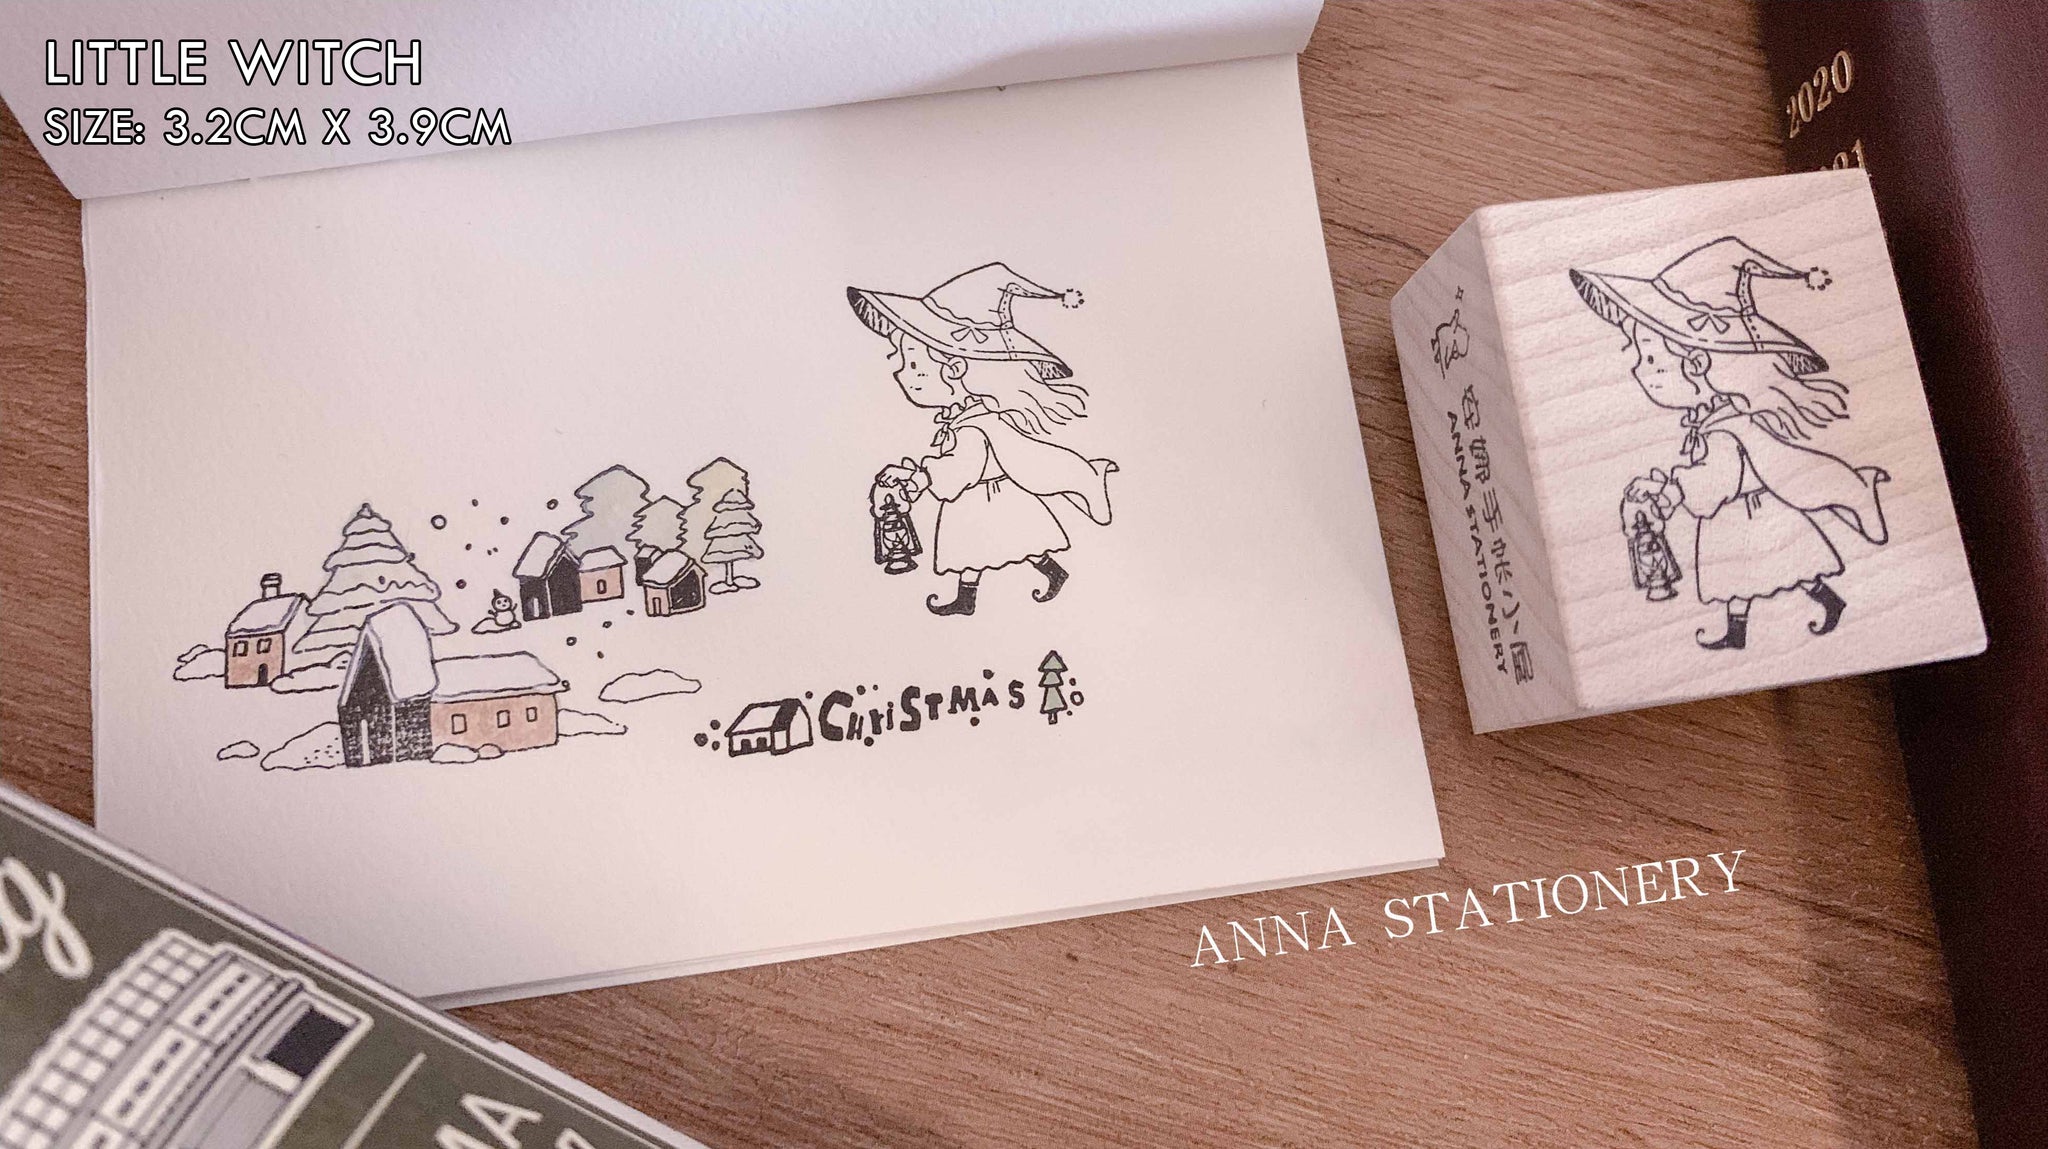 Anna Stationery: Anna's Daily Life Series Stamps